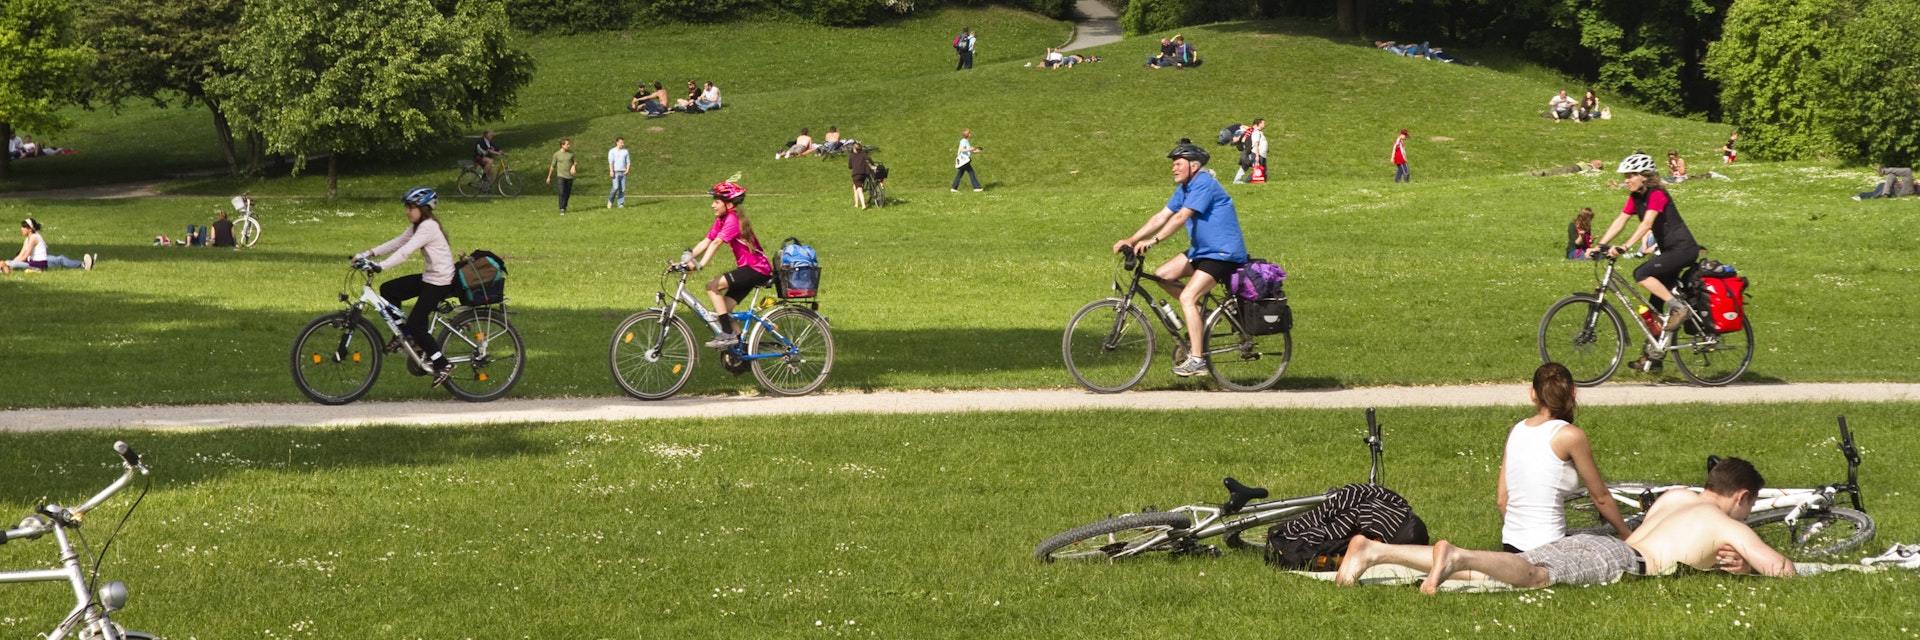 Isar Cycle Route, Monopteros in background, English Garden, Munich, Upper Bavaria, Germany